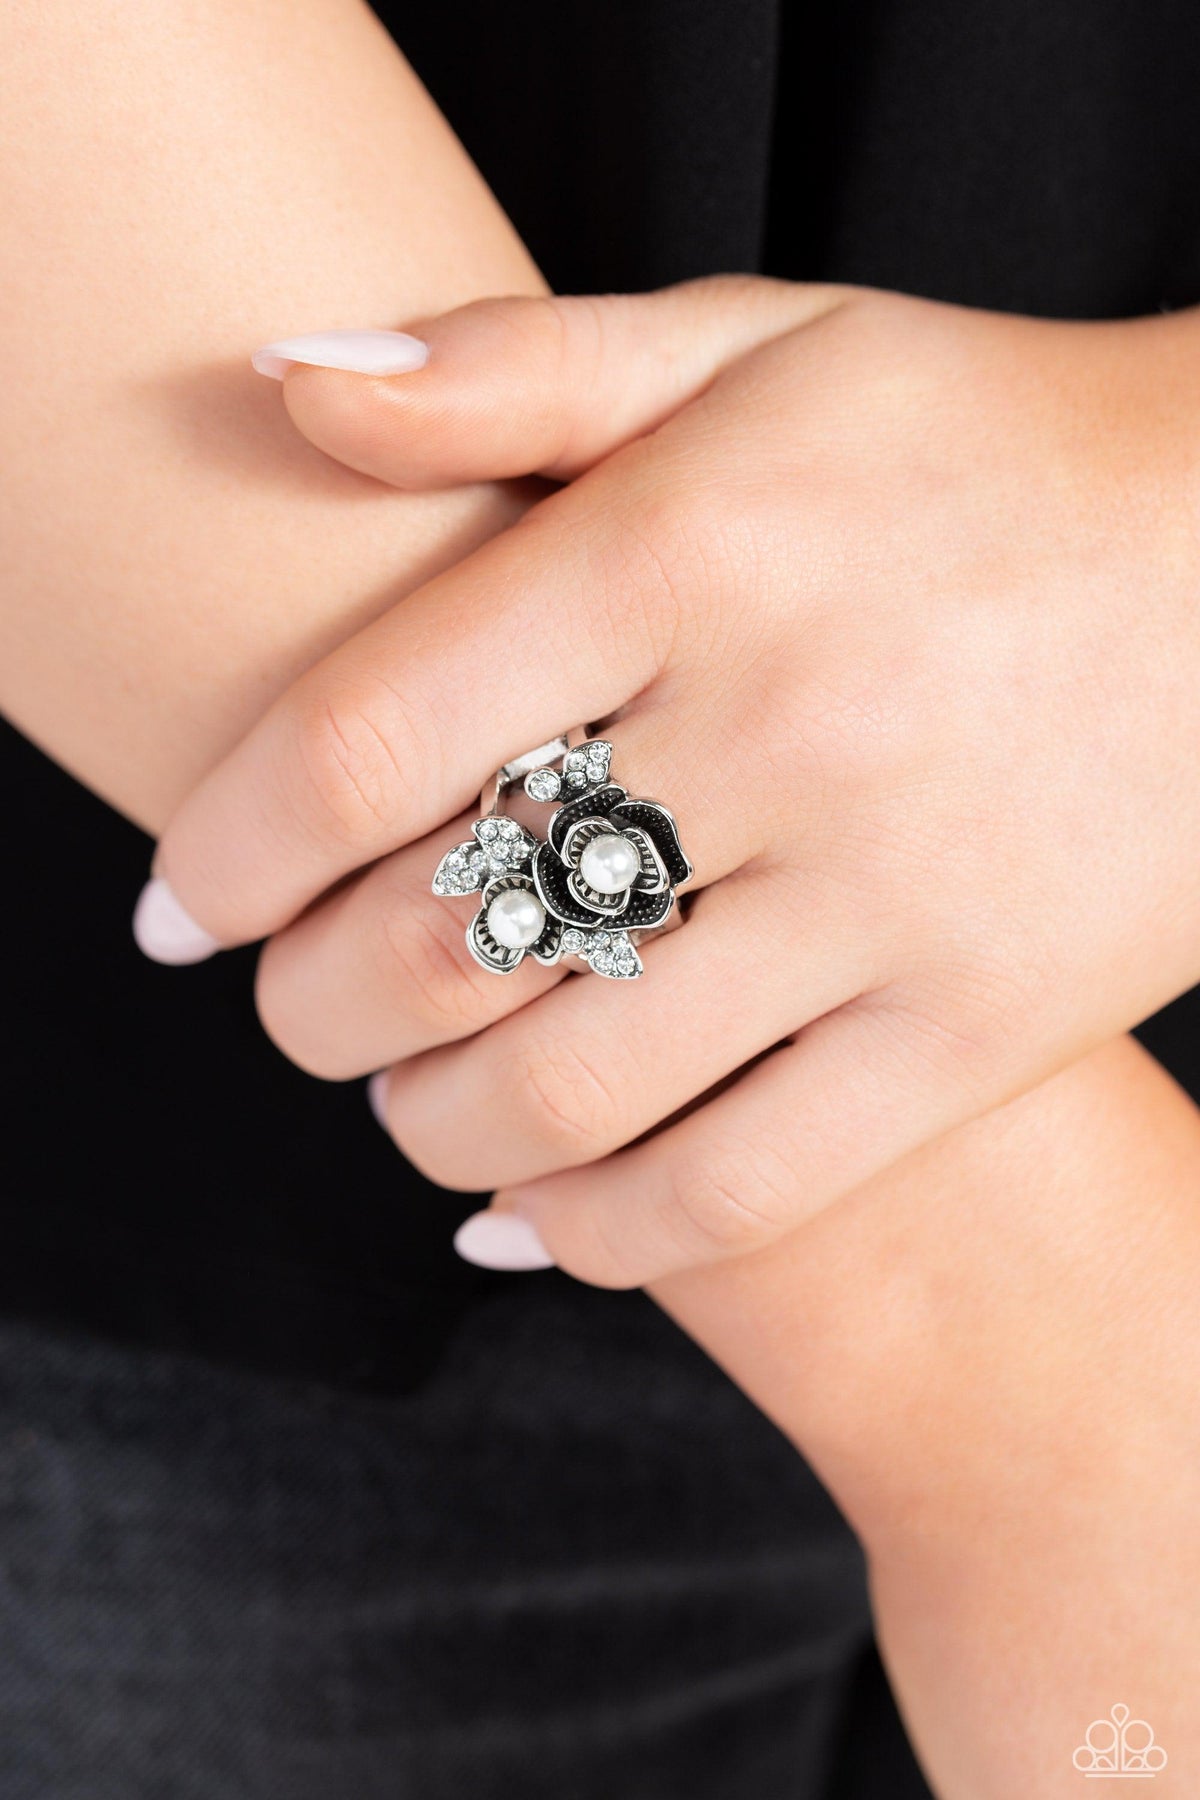 Fine-BLOOMING White Pearl Floral Ring - Paparazzi Accessories-on model - CarasShop.com - $5 Jewelry by Cara Jewels